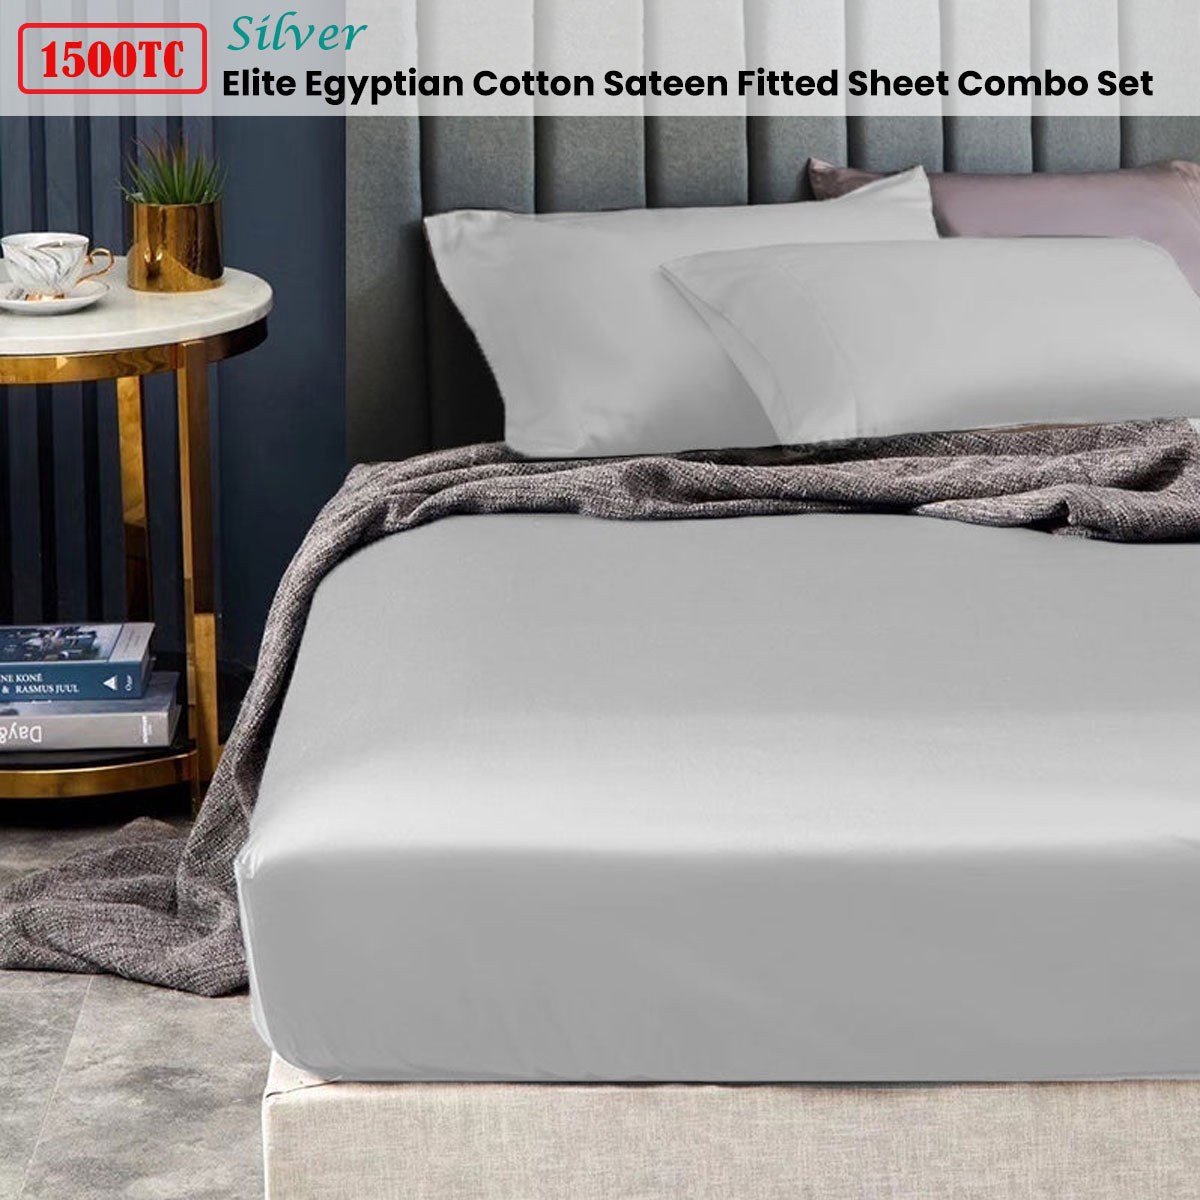 1500TC Elite Egyptian Cotton Sateen Fitted Sheet Combo Set Silver King